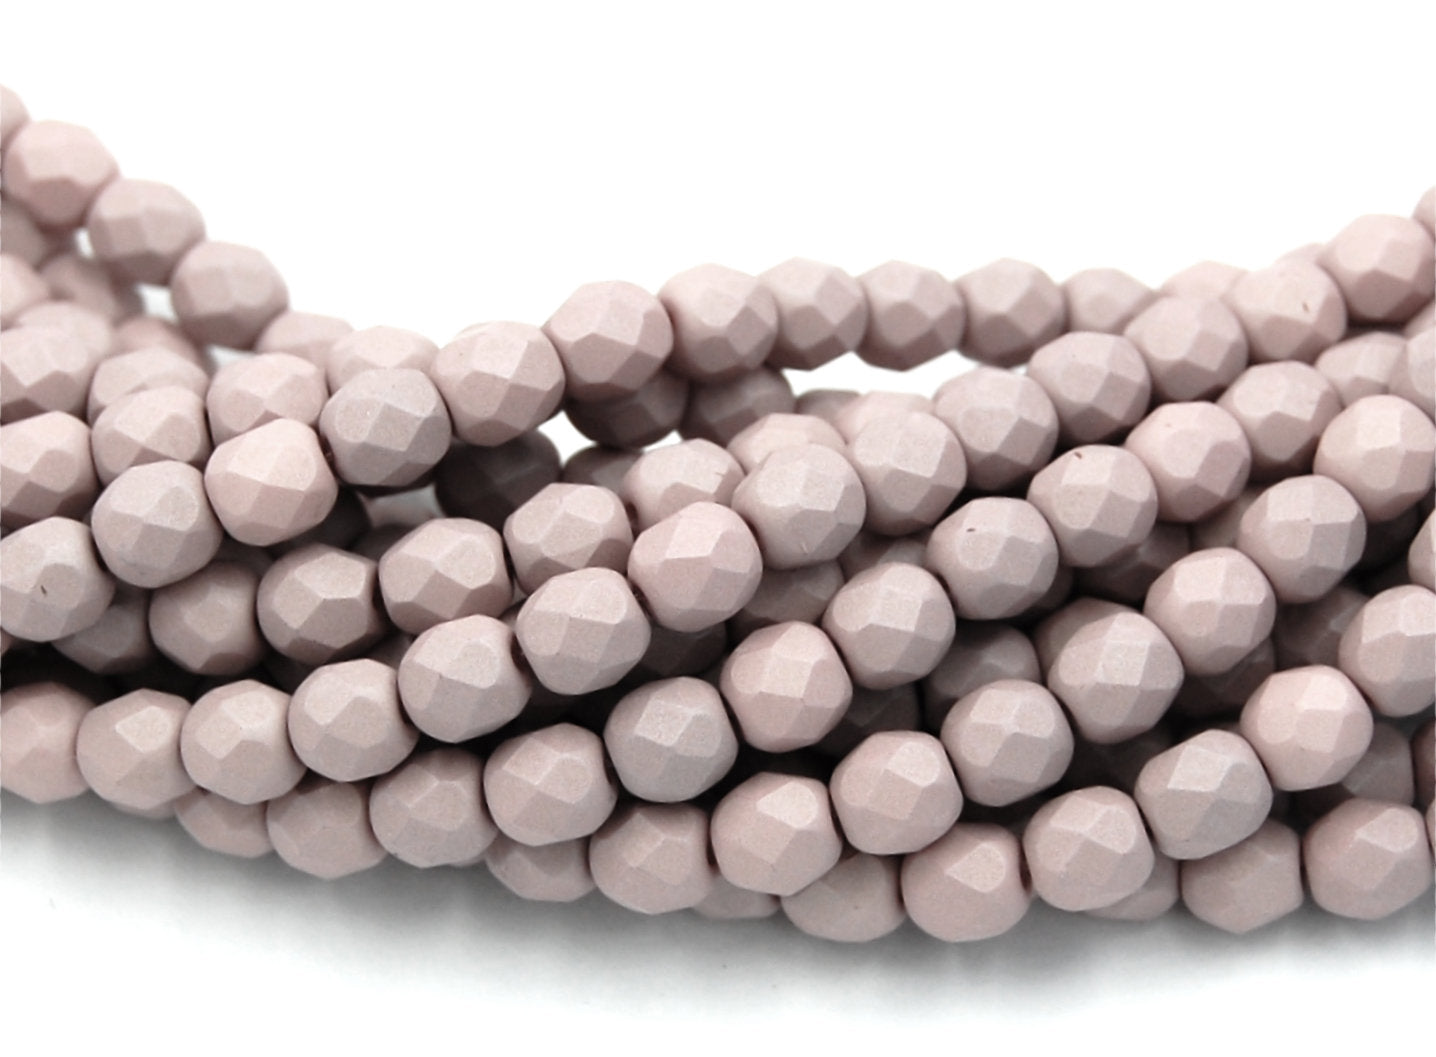 Opaque Saturated Mushroom Czech Glass Faceted Bead 4mm Round - 50 Pc